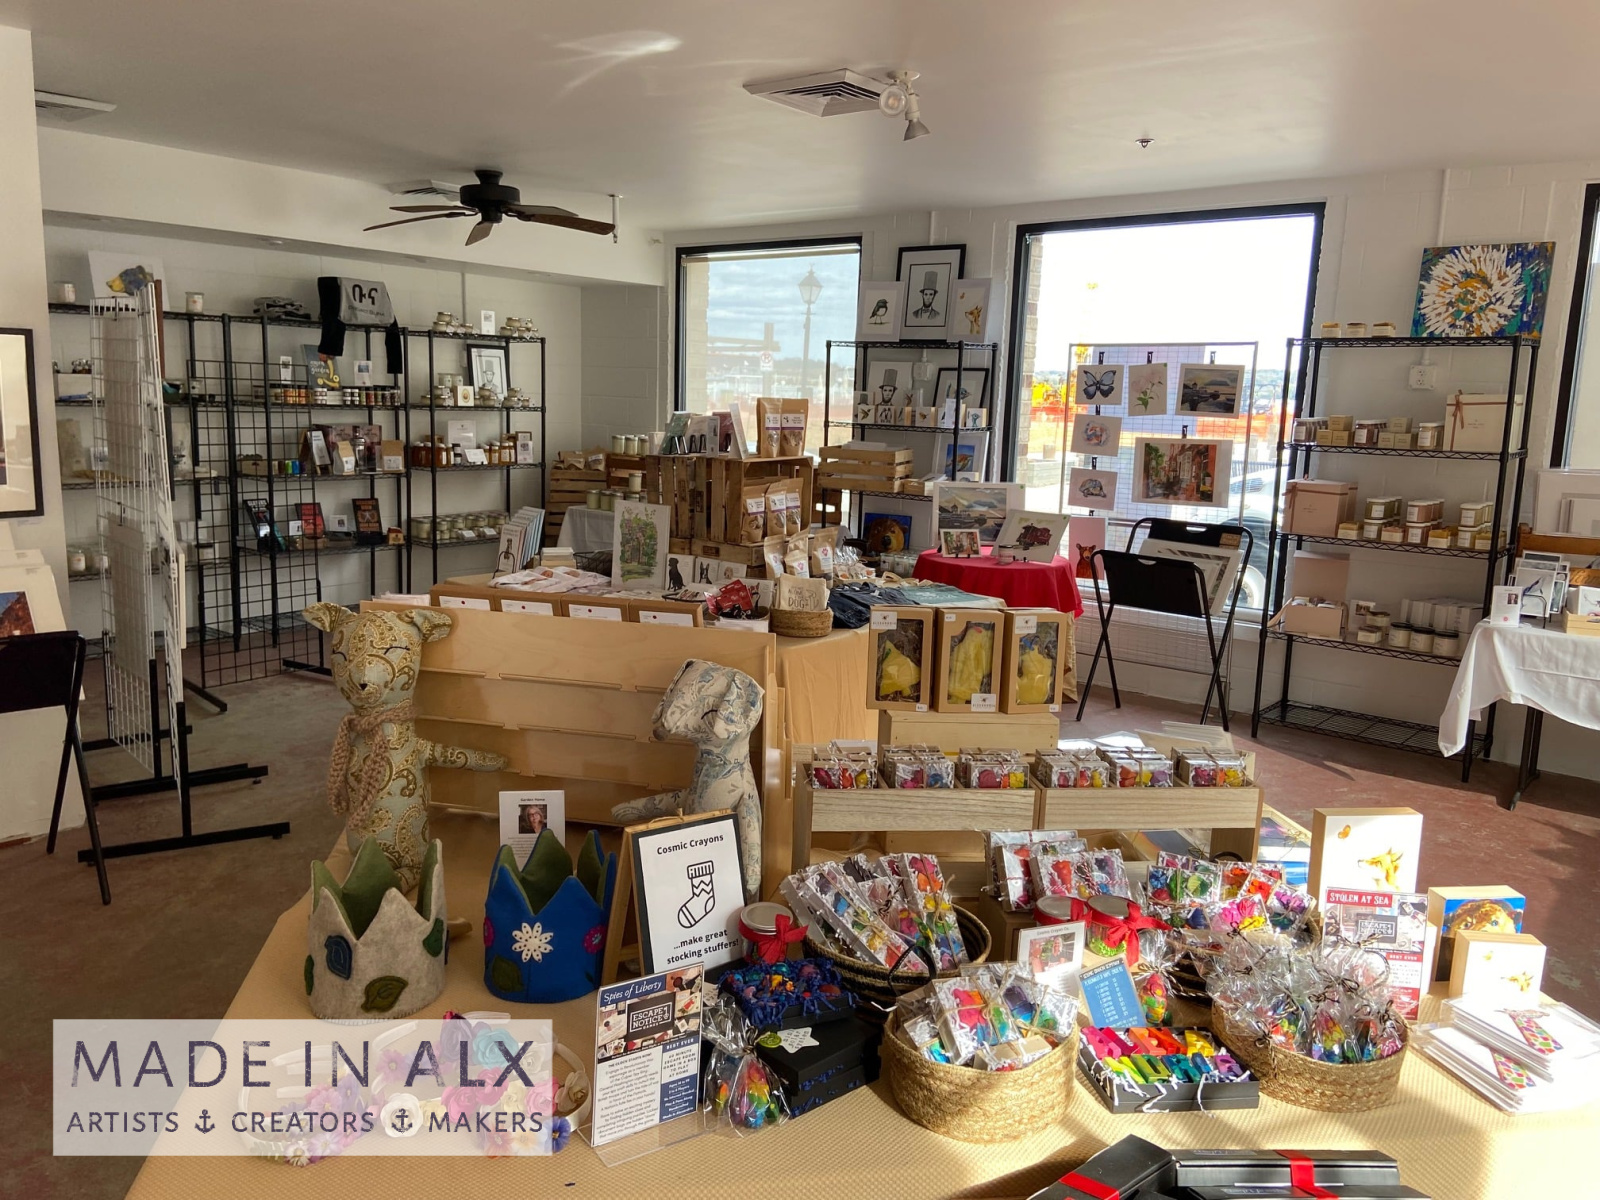 Made in ALX makes it easy to find items handmade in Alexandria, Virginia